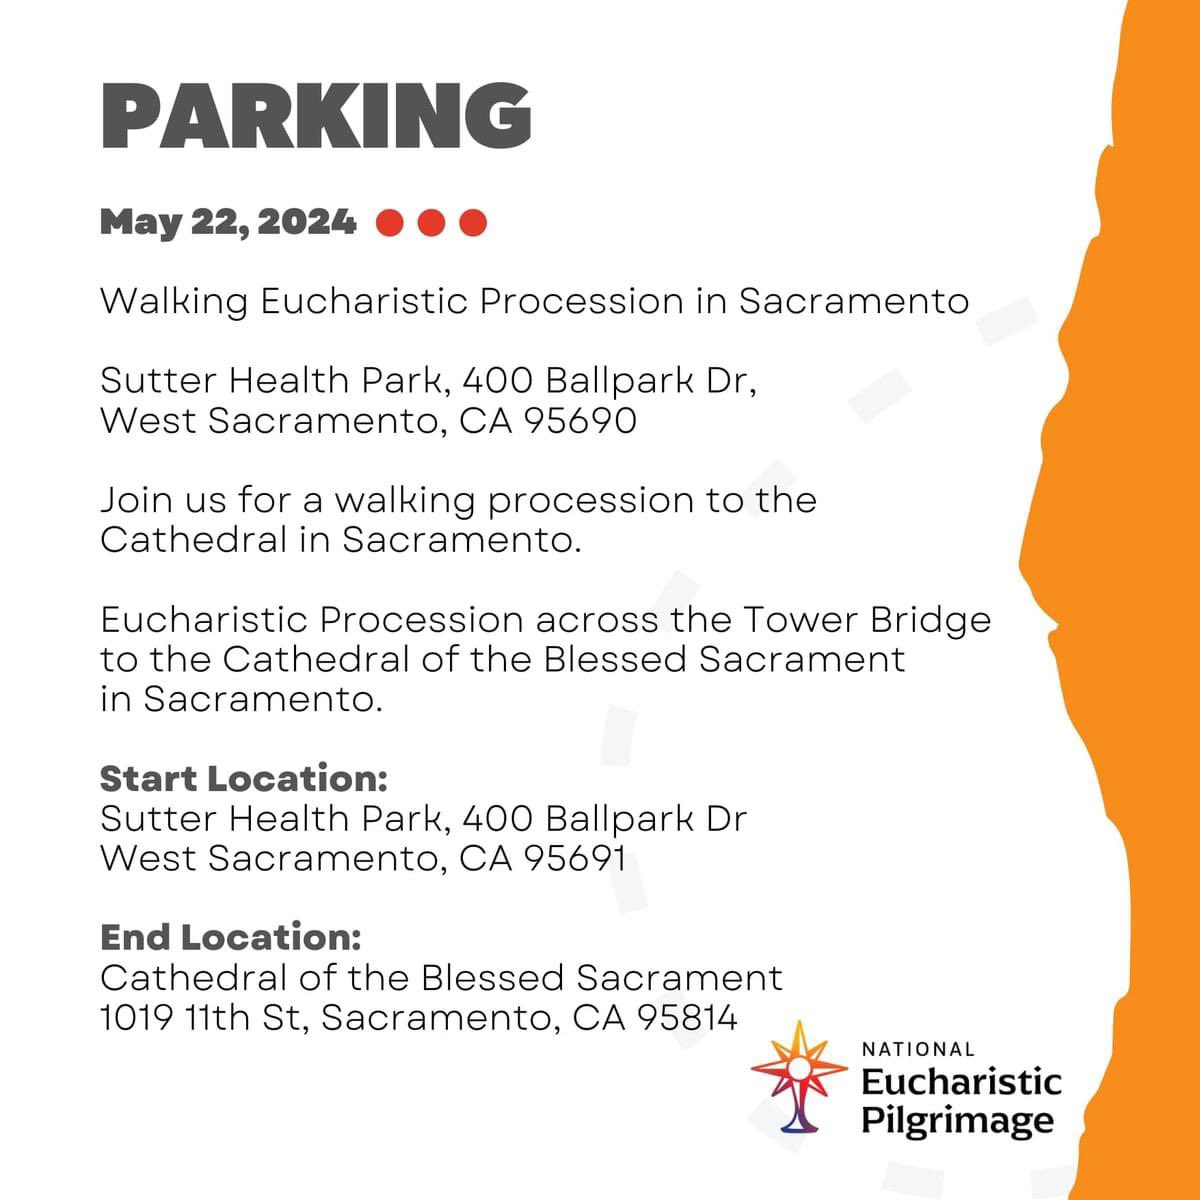 Today at 11AM! Join Bishop Soto for a Eucharist Procession across the Tower Bridge to the Cathedral of the Blessed Sacrament on Day 2 of the St. Junípero Serra route in Sacramento, CA. 🅿️ Parking Details below! ☀️ Weather Update: 73° and Sunny! Don't miss out on the